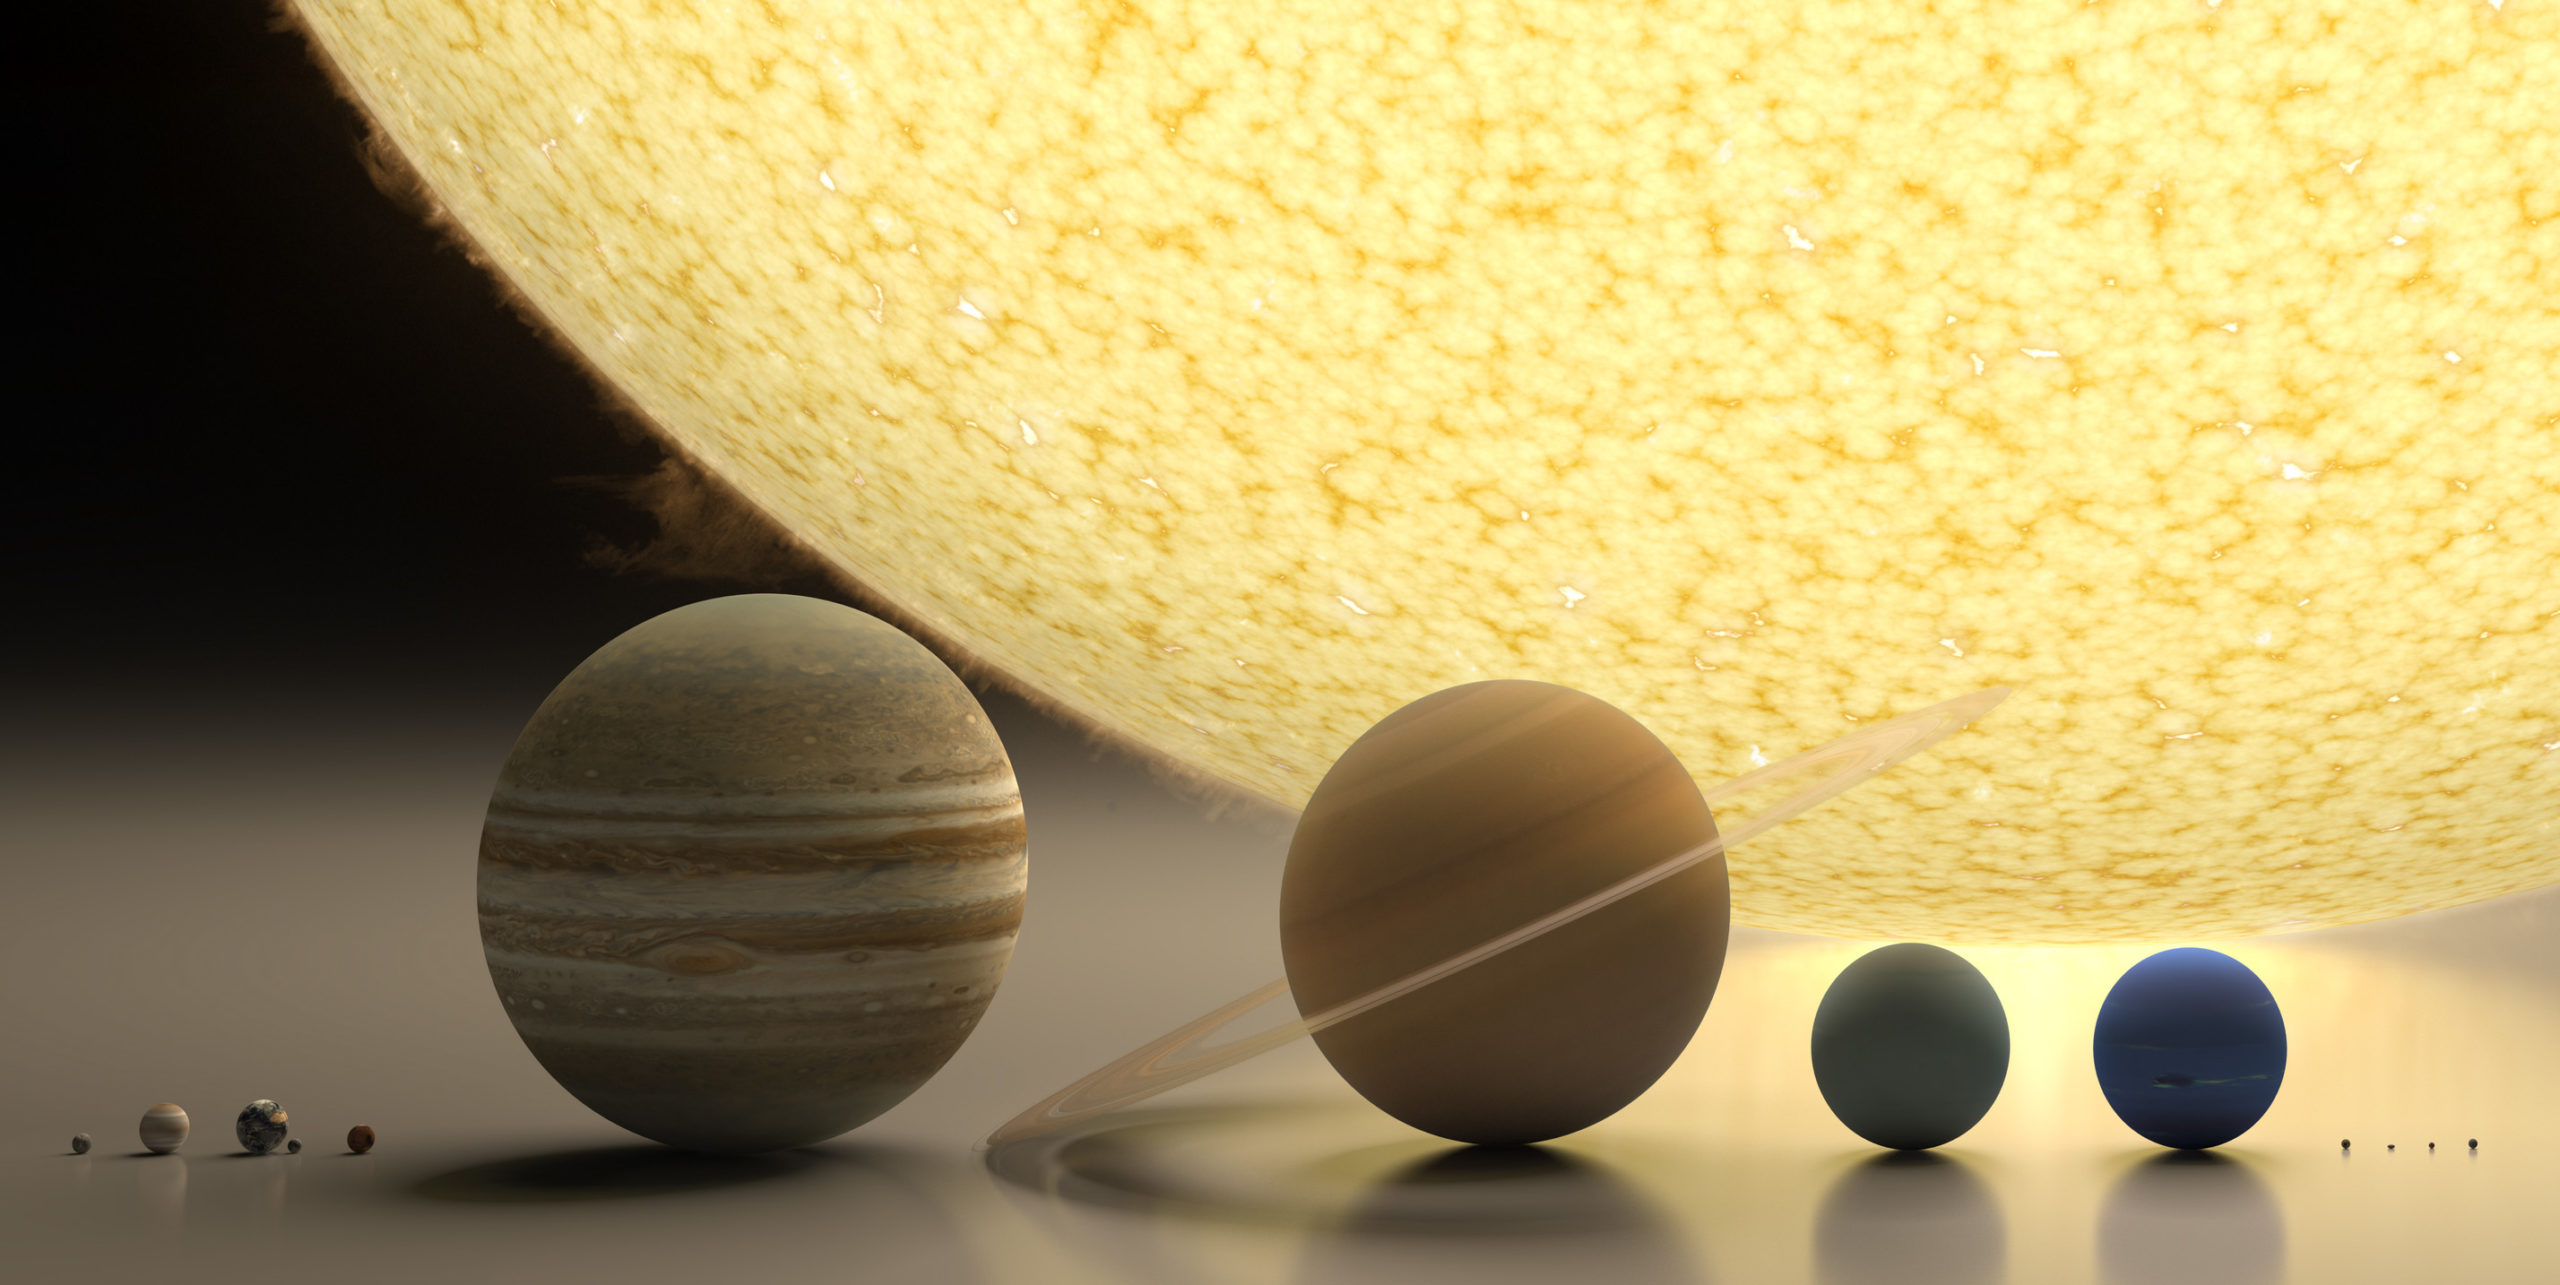 Spectacular Rendering Of The Solar System To Scale